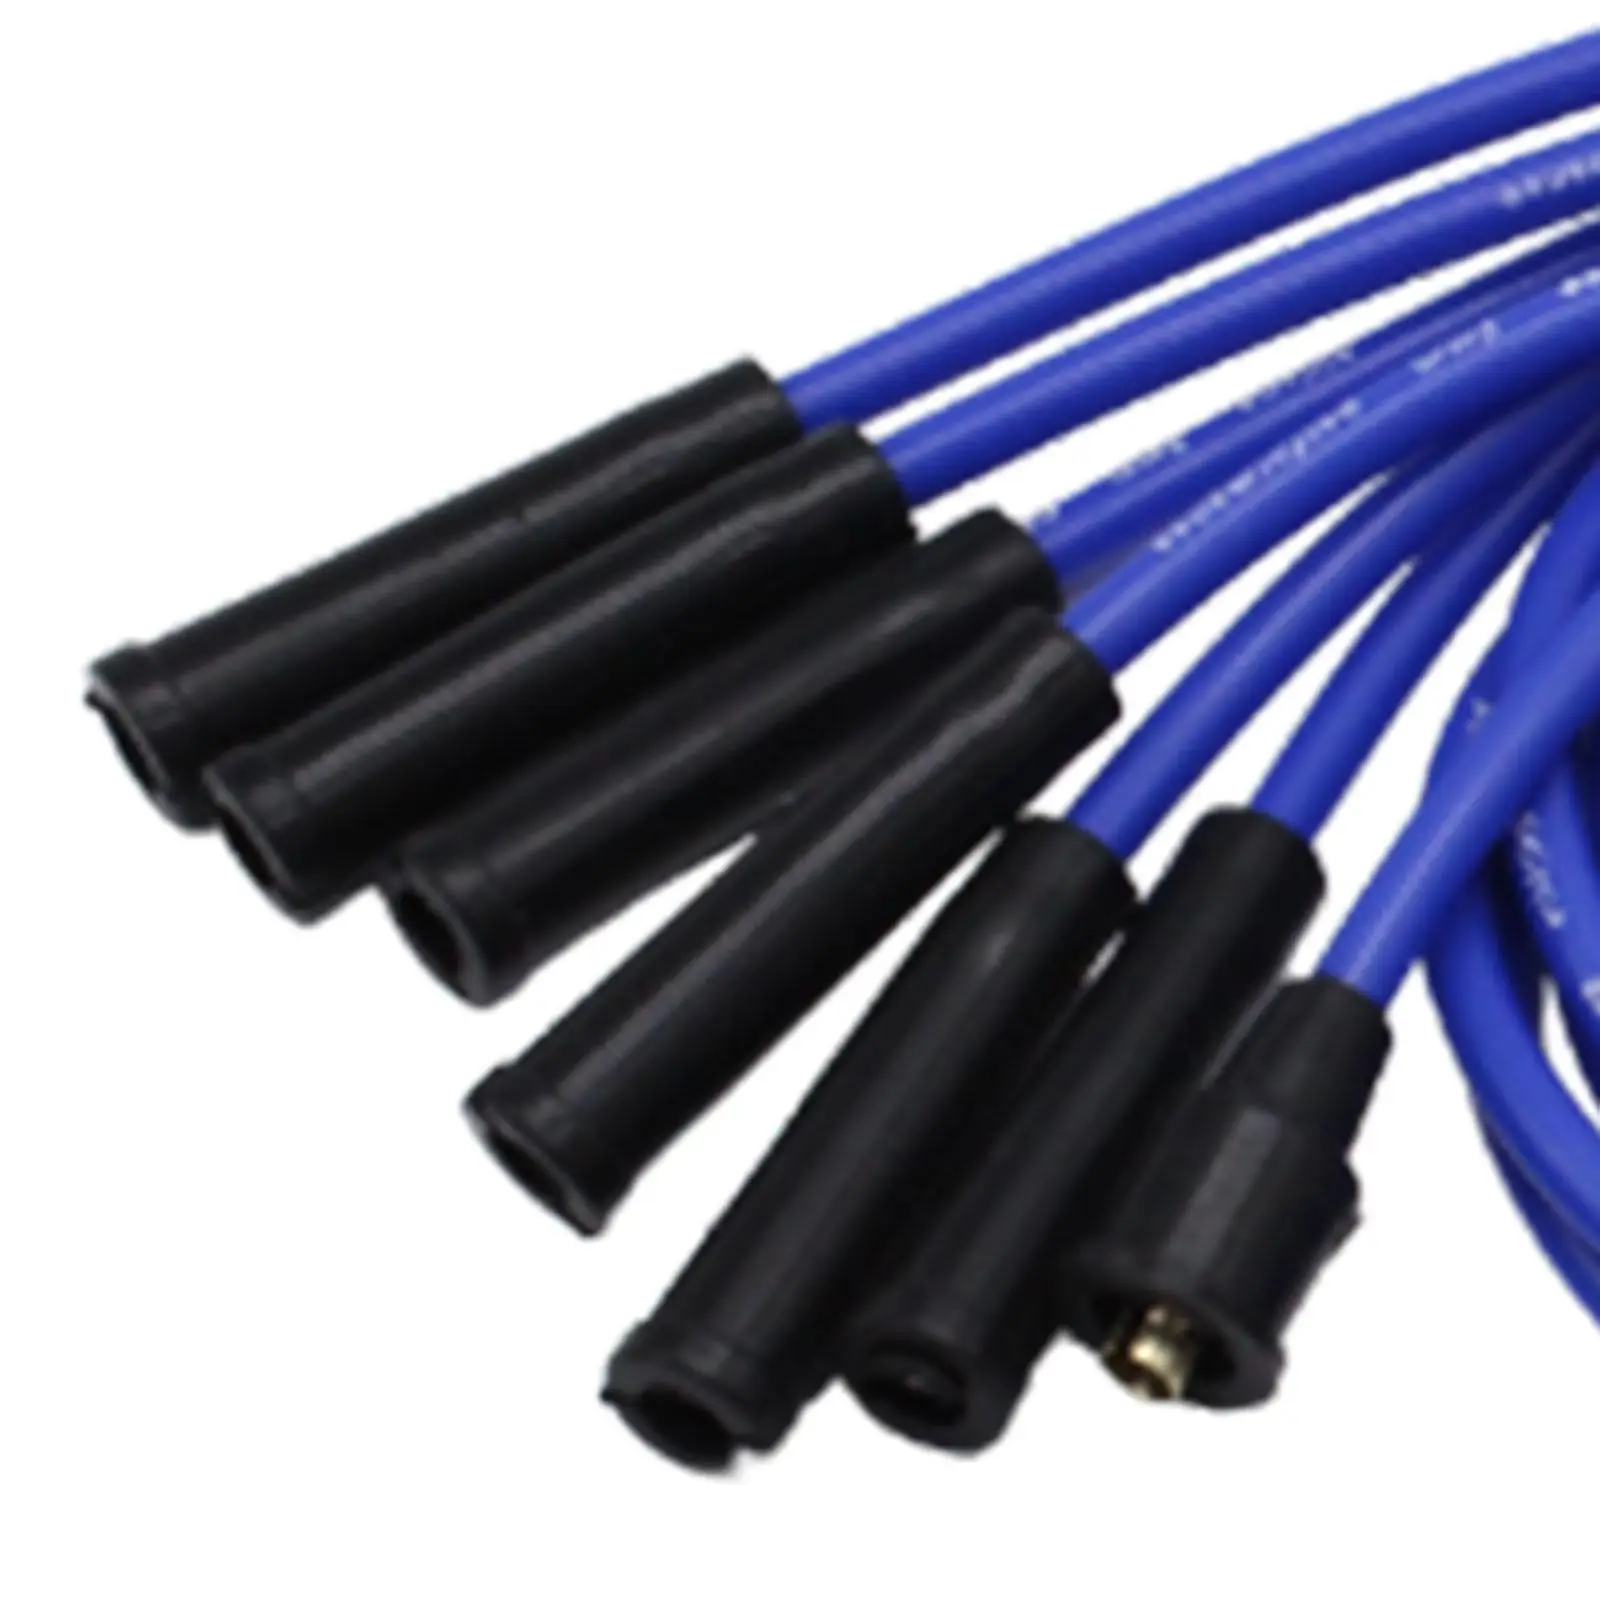 8mm HT Leads Universal Spark Plug Cables for 6 Cylinder Ignition Parts